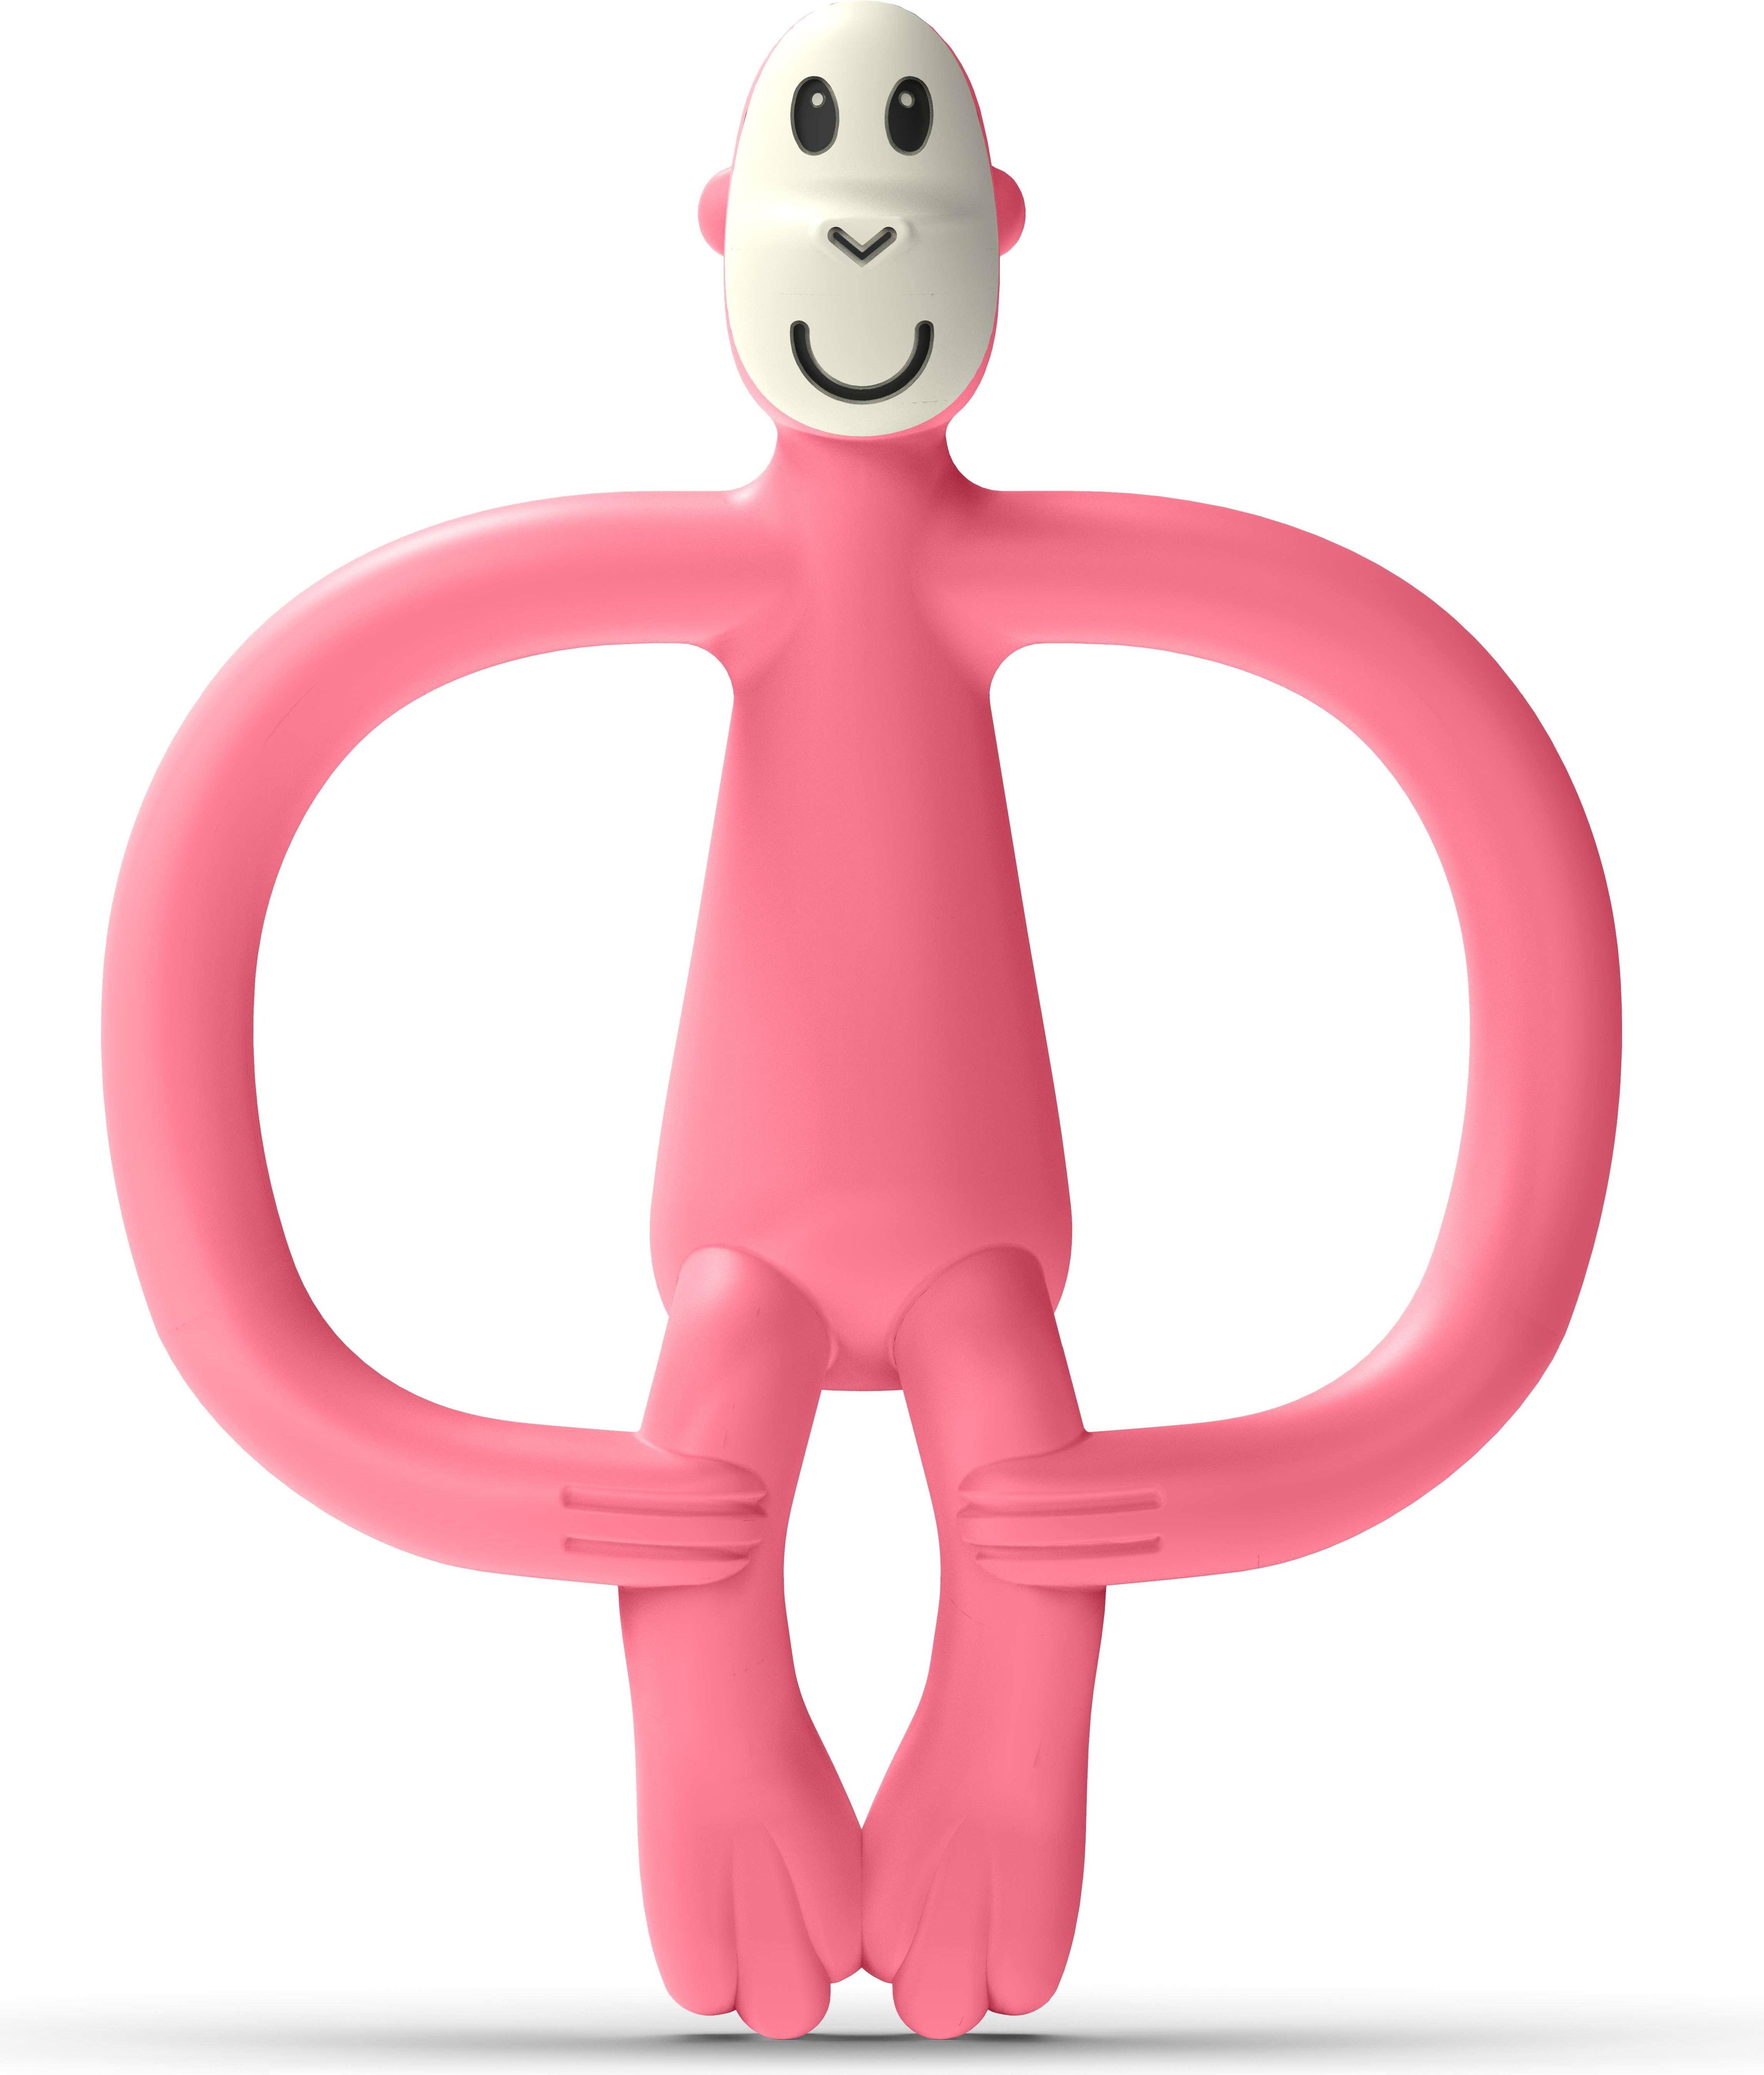 Matchstick Monkey, Antimicrobial Silicone Teether & Gel Applicator, Easy To Grip, Bpa Free, 3 Months Old+, 11 cm, Pink Monkey